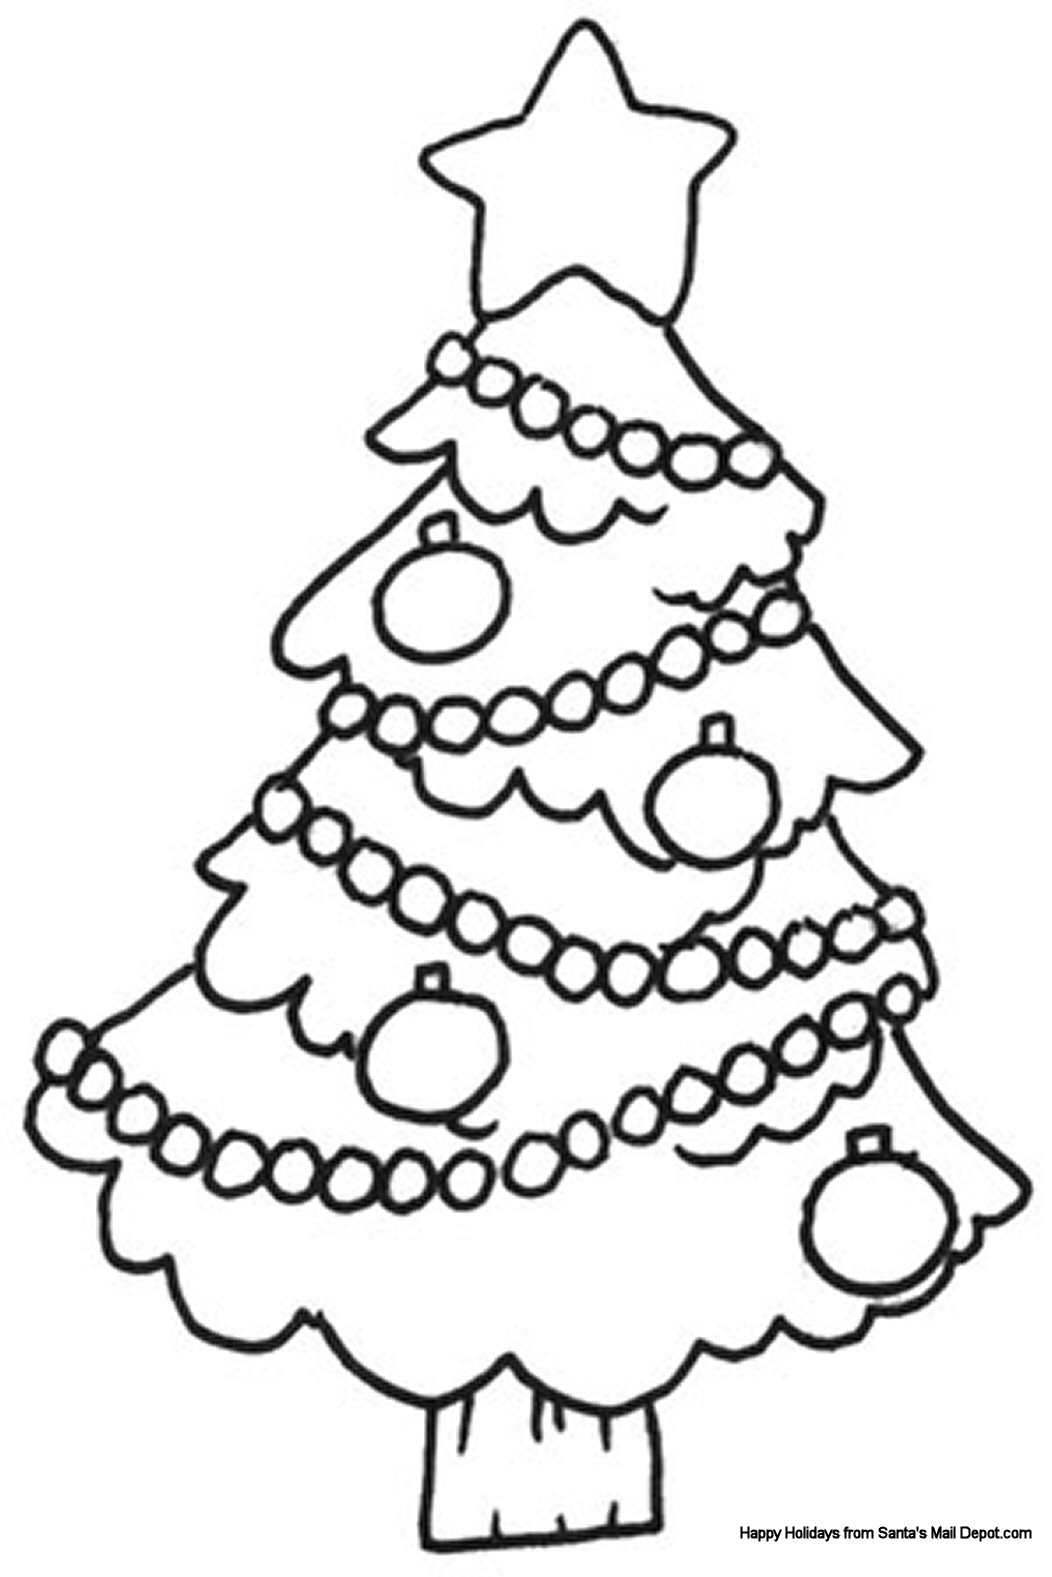 allthingsinfo: Christmas coloring pages